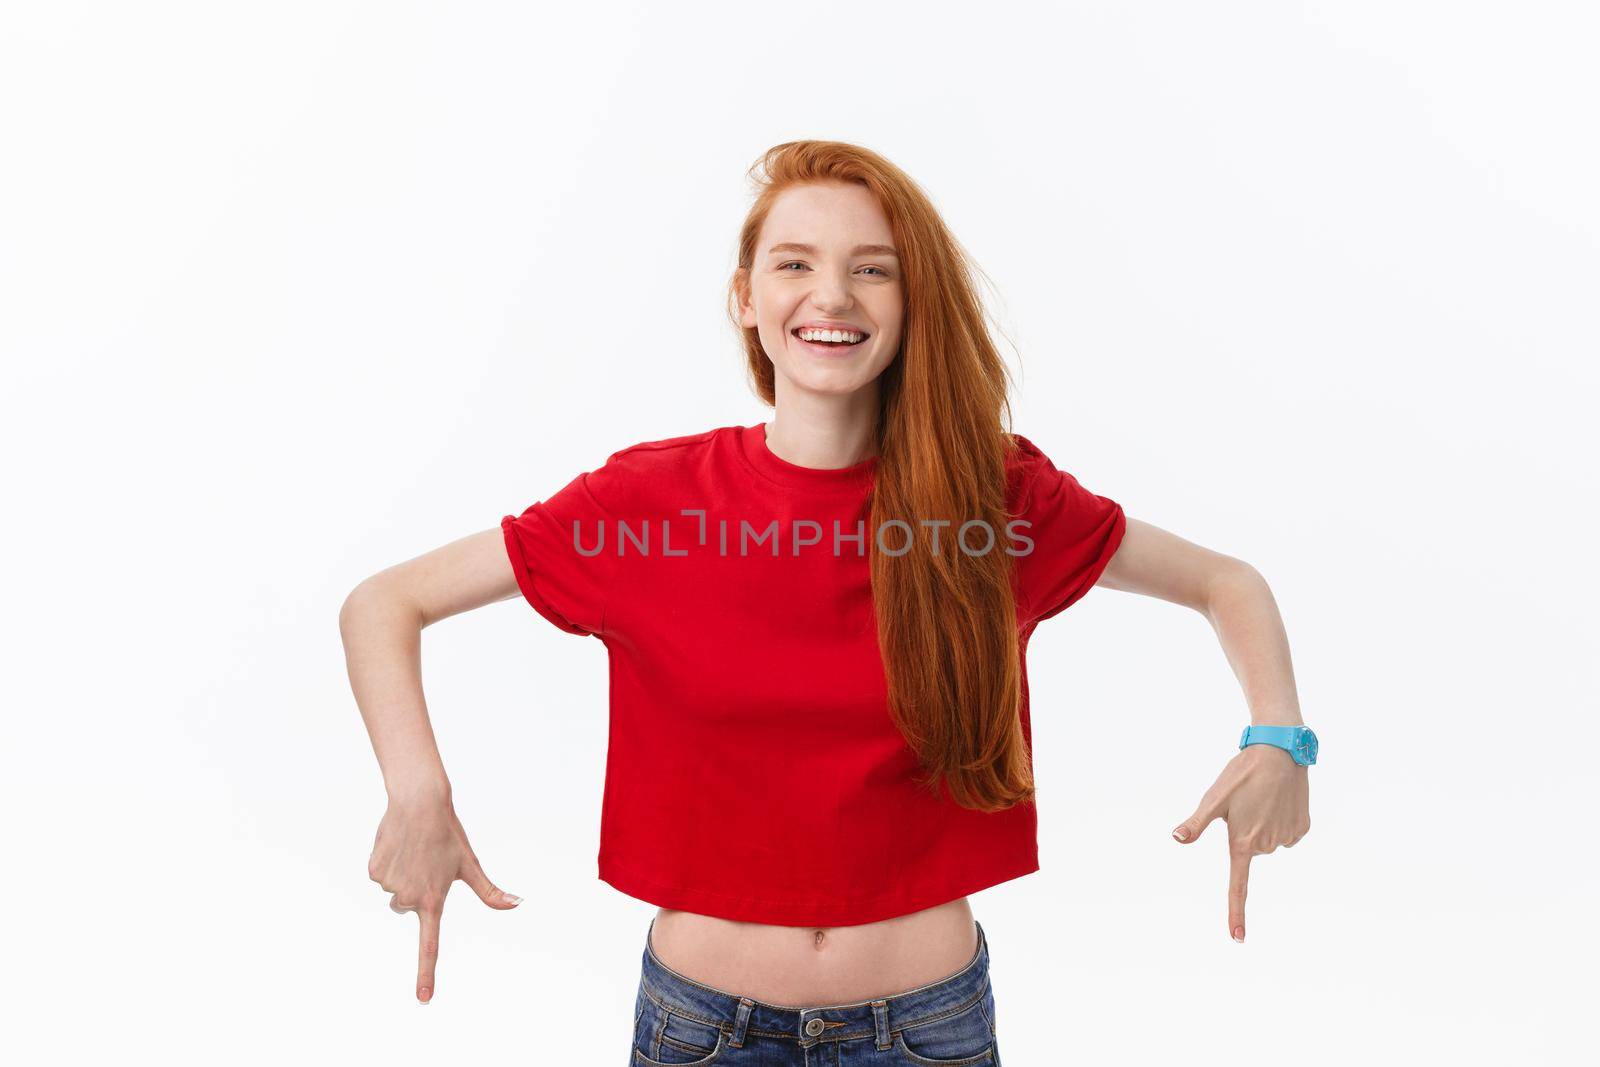 Photo of happy young woman standing isolated over white wall background. Looking camera showing copyspace pointing.